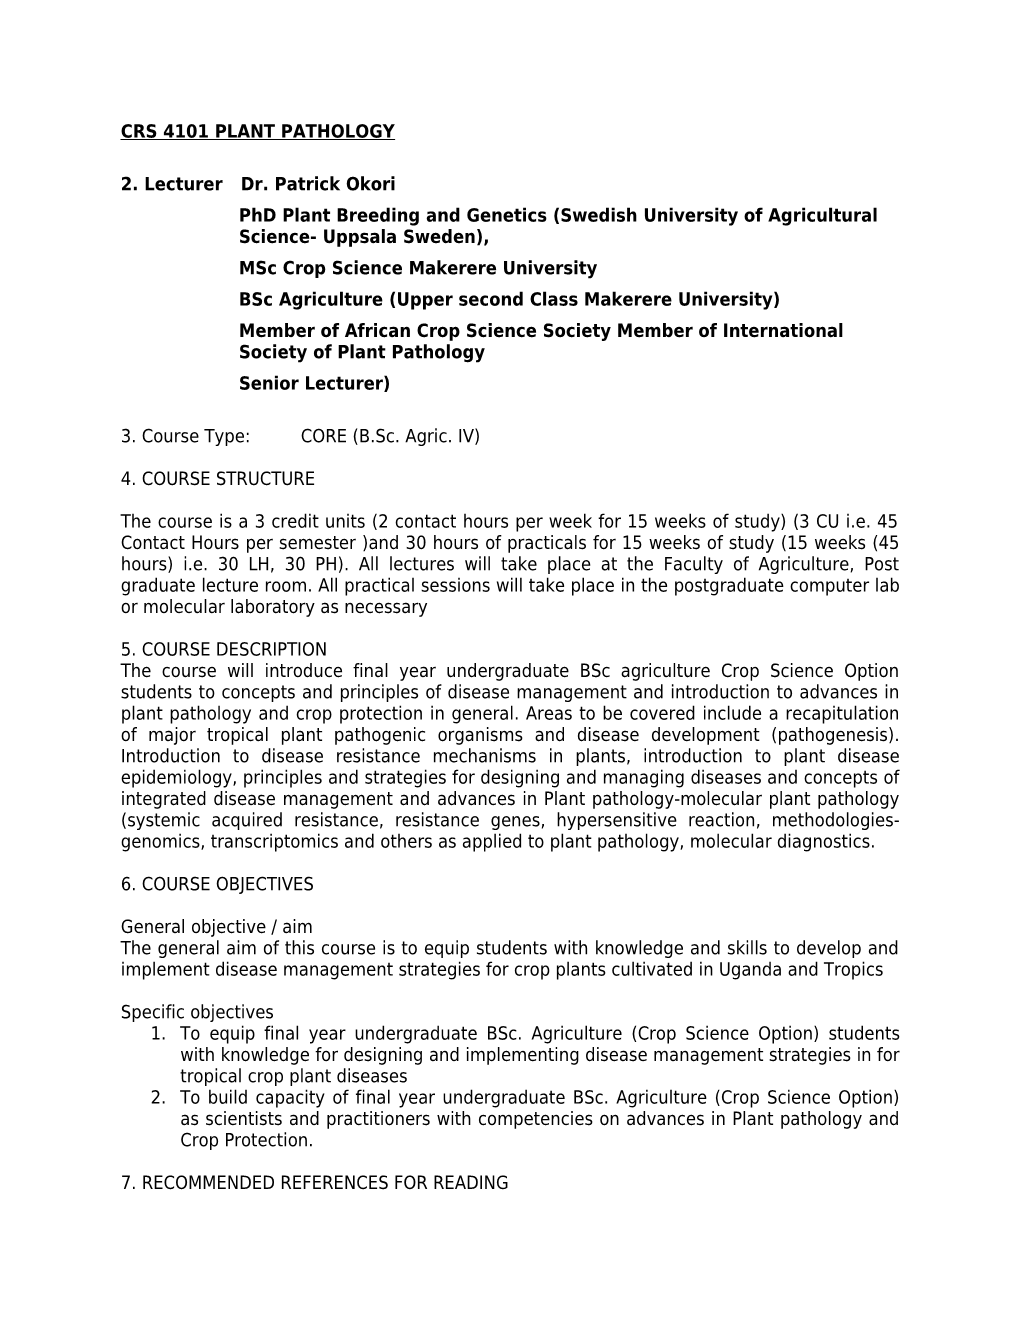 Phd Plant Breeding and Genetics (Swedish University of Agricultural Science- Uppsala Sweden)